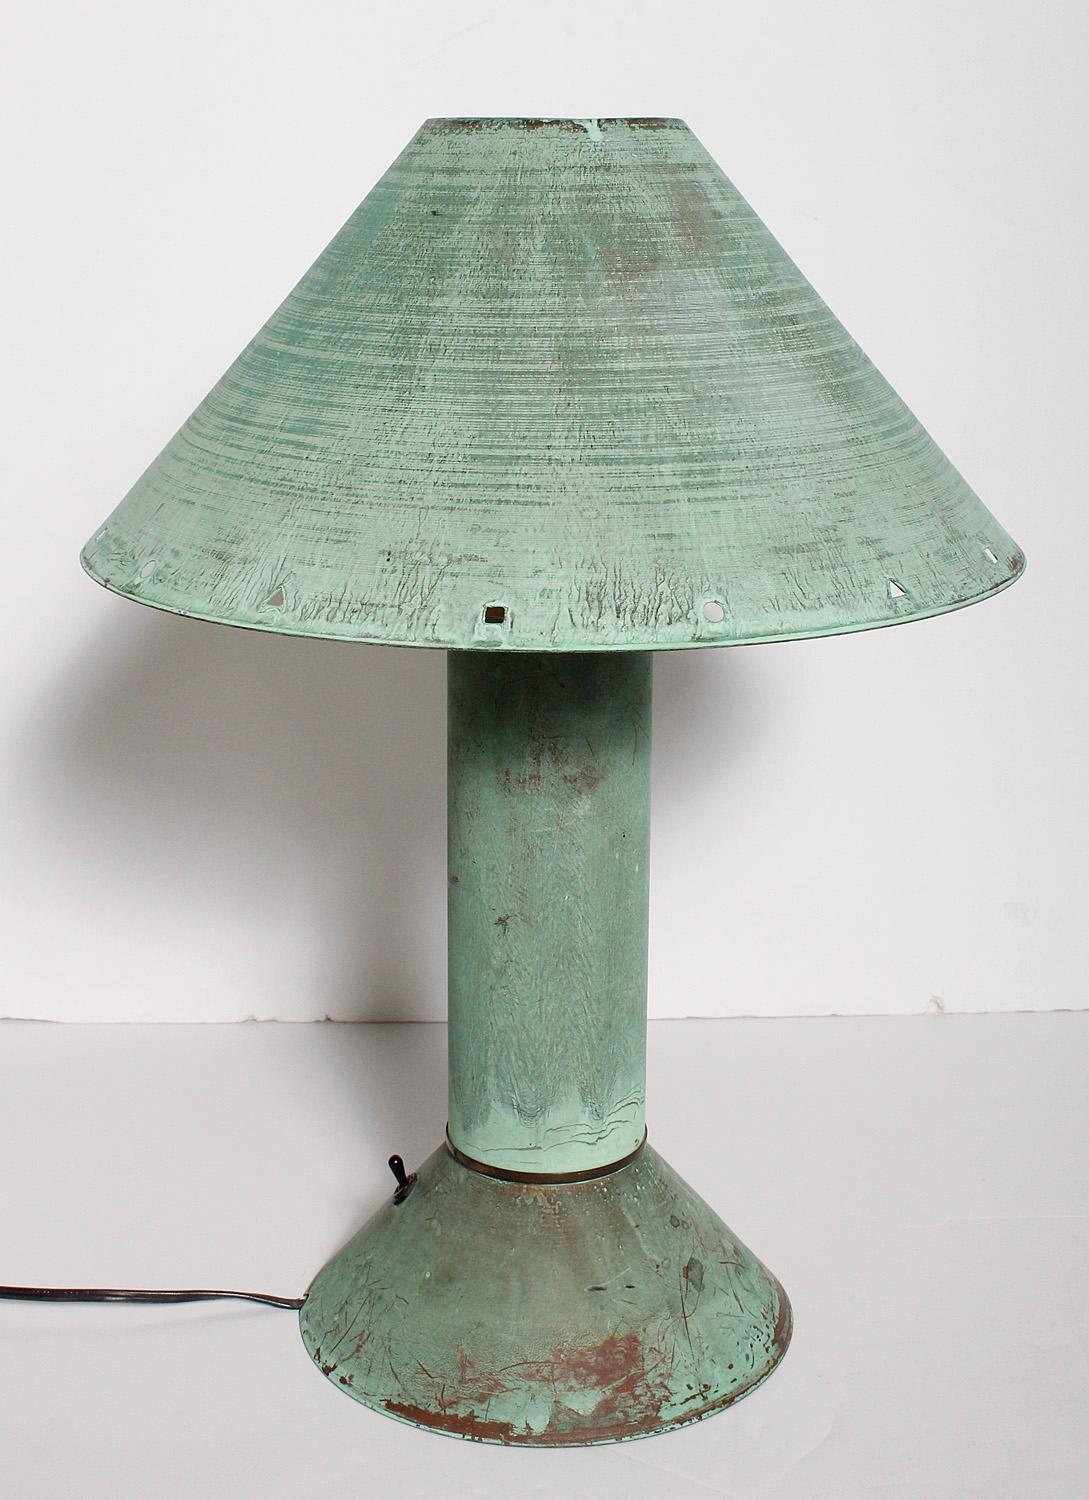 Rare oxidized copper version of this highly sought-after 1980s table lamp by Los Angeles-based industrial designer, Ron Rezek.